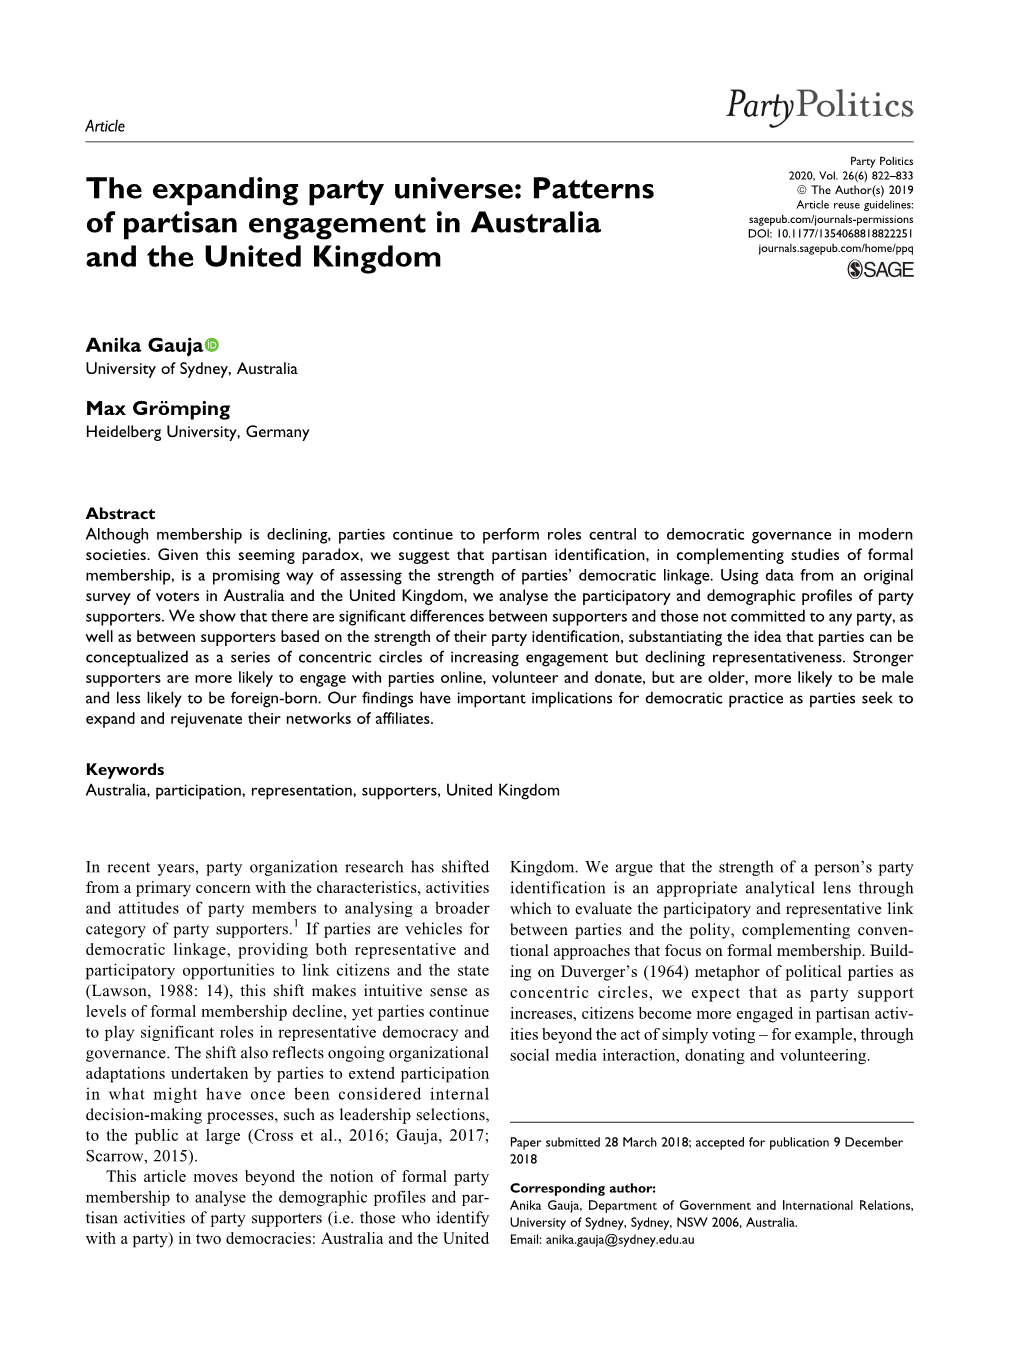 The Expanding Party Universe: Patterns of Partisan Engagement In